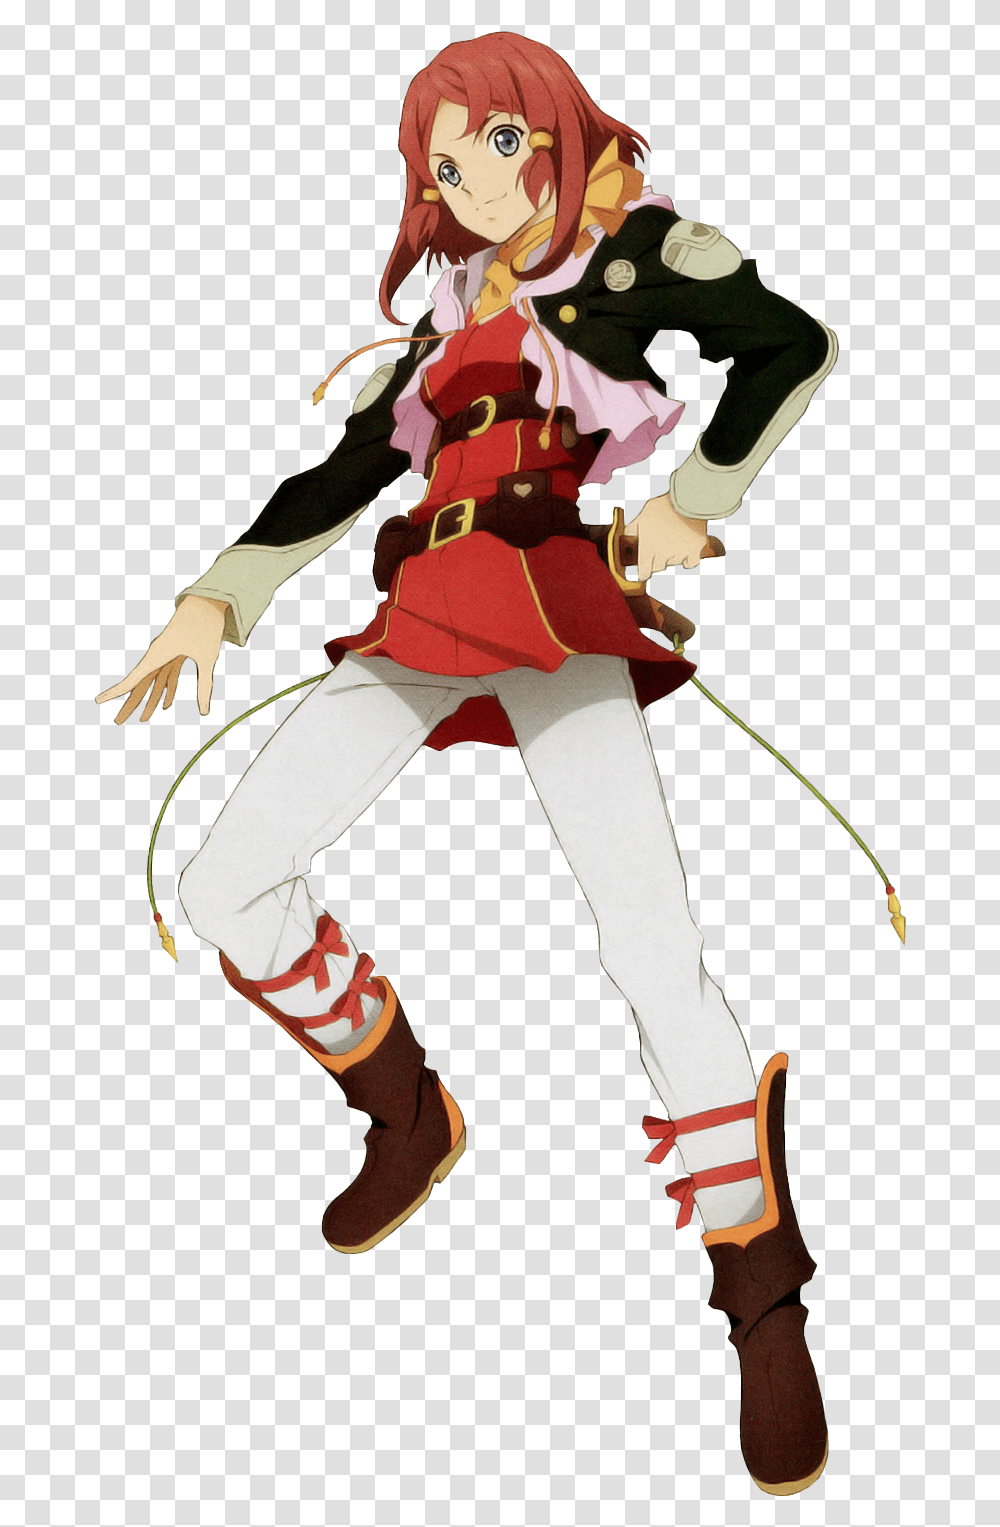 Tales Of Zestiria Rose From Tales Of Zestiria, Person, Sport, People Transparent Png